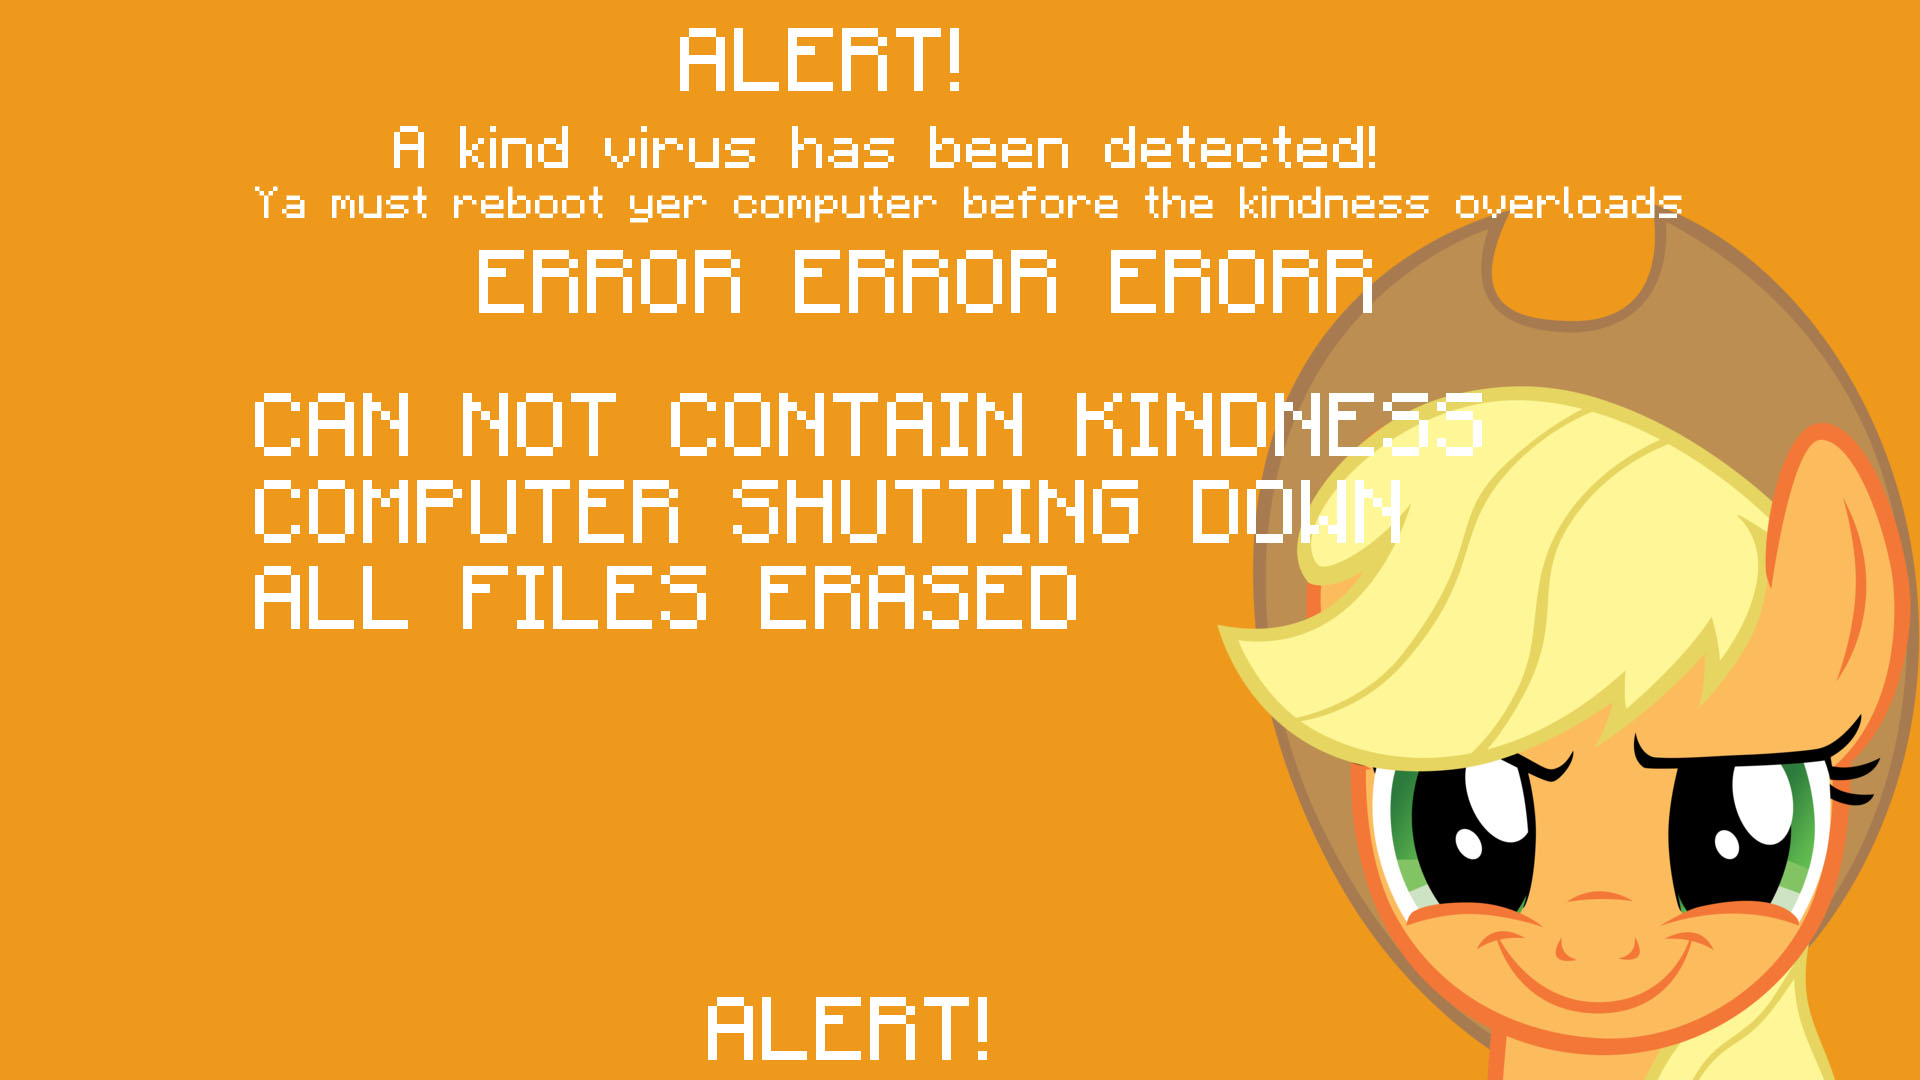 Applejack Virus by BlissfulBiscuit and jlryan